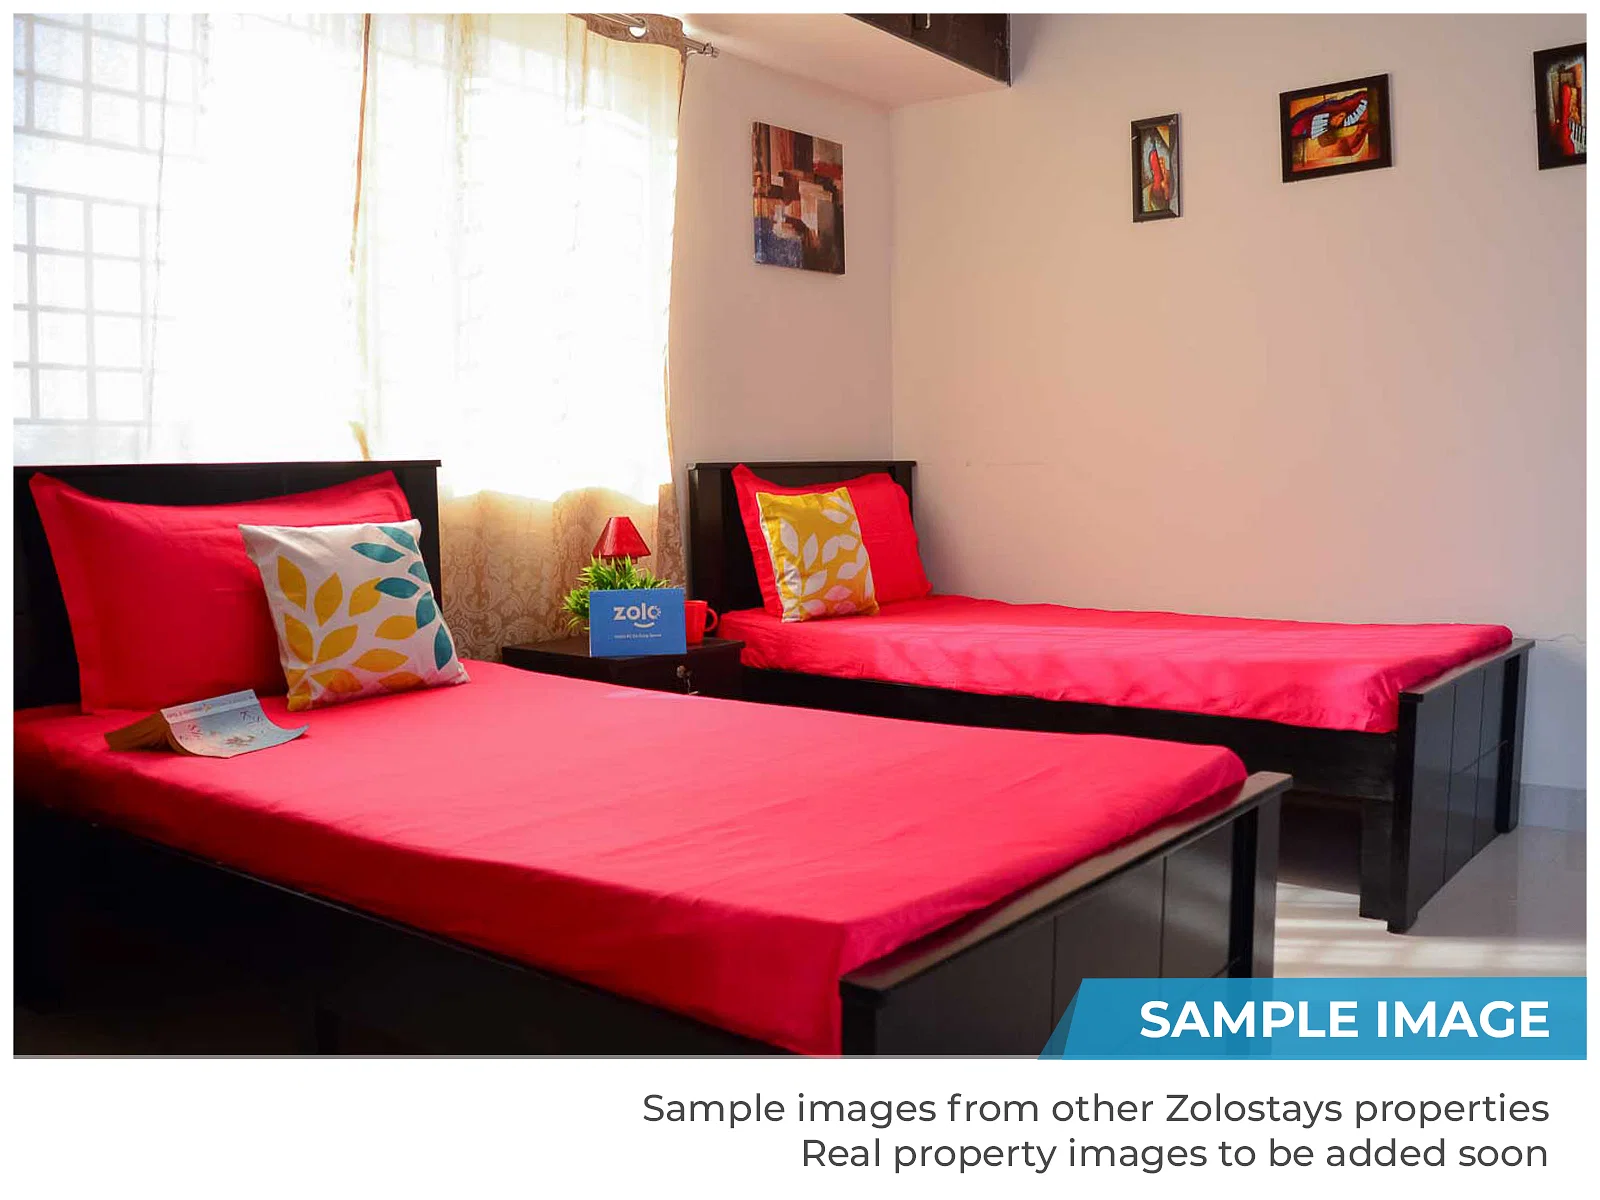 safe and affordable hostels for couple students with 24/7 security and CCTV surveillance-Zolo Cherry